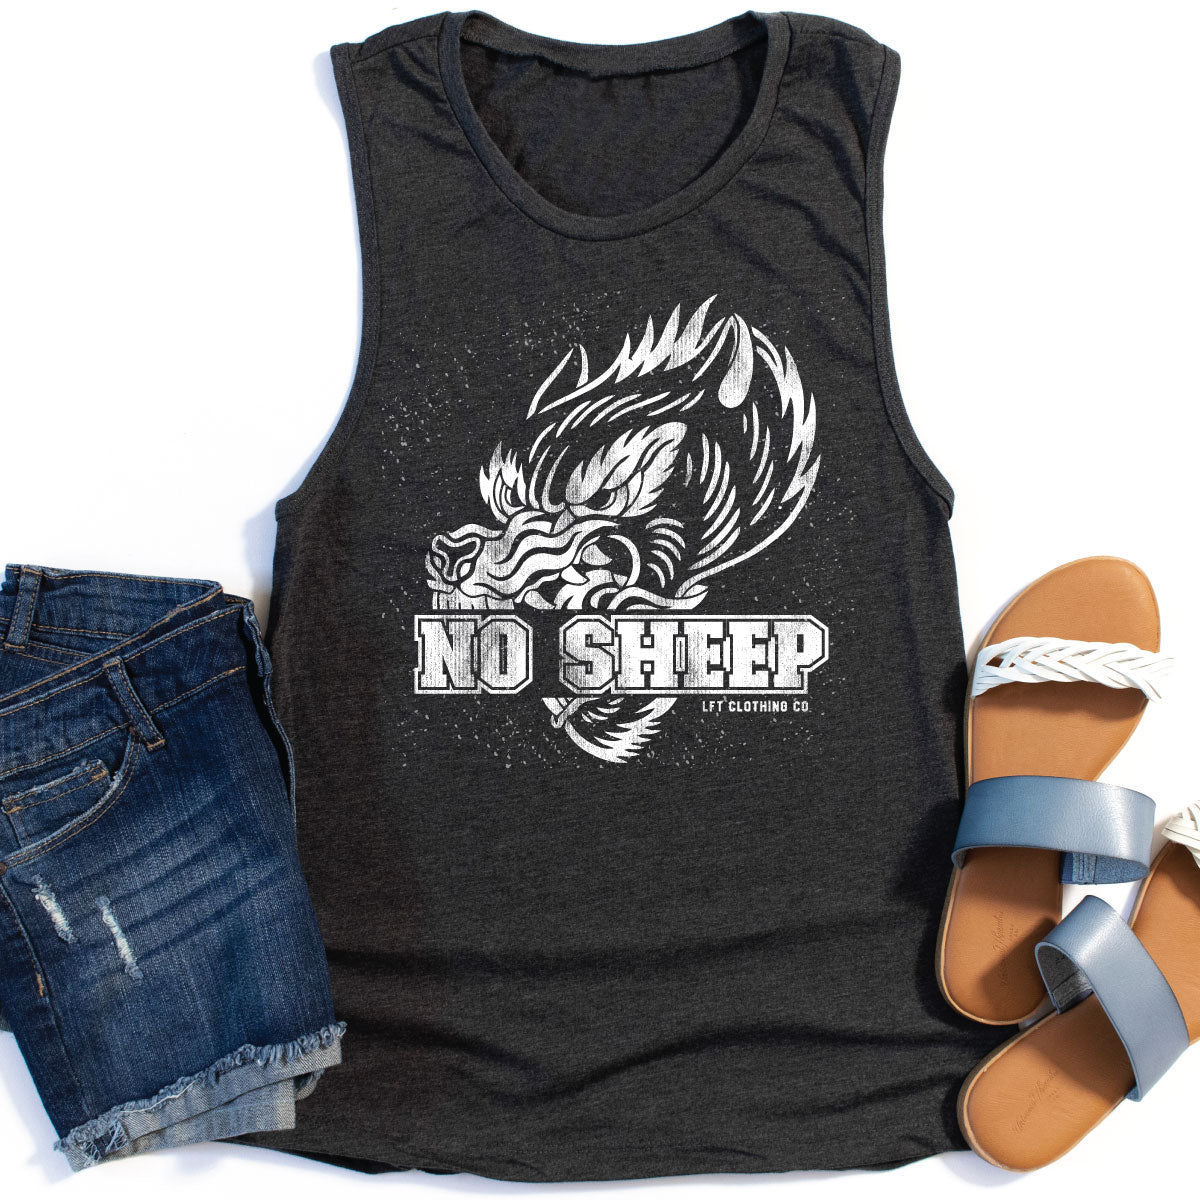 No Sheep Women’s Fitted V.I.T.™ Festival Tank